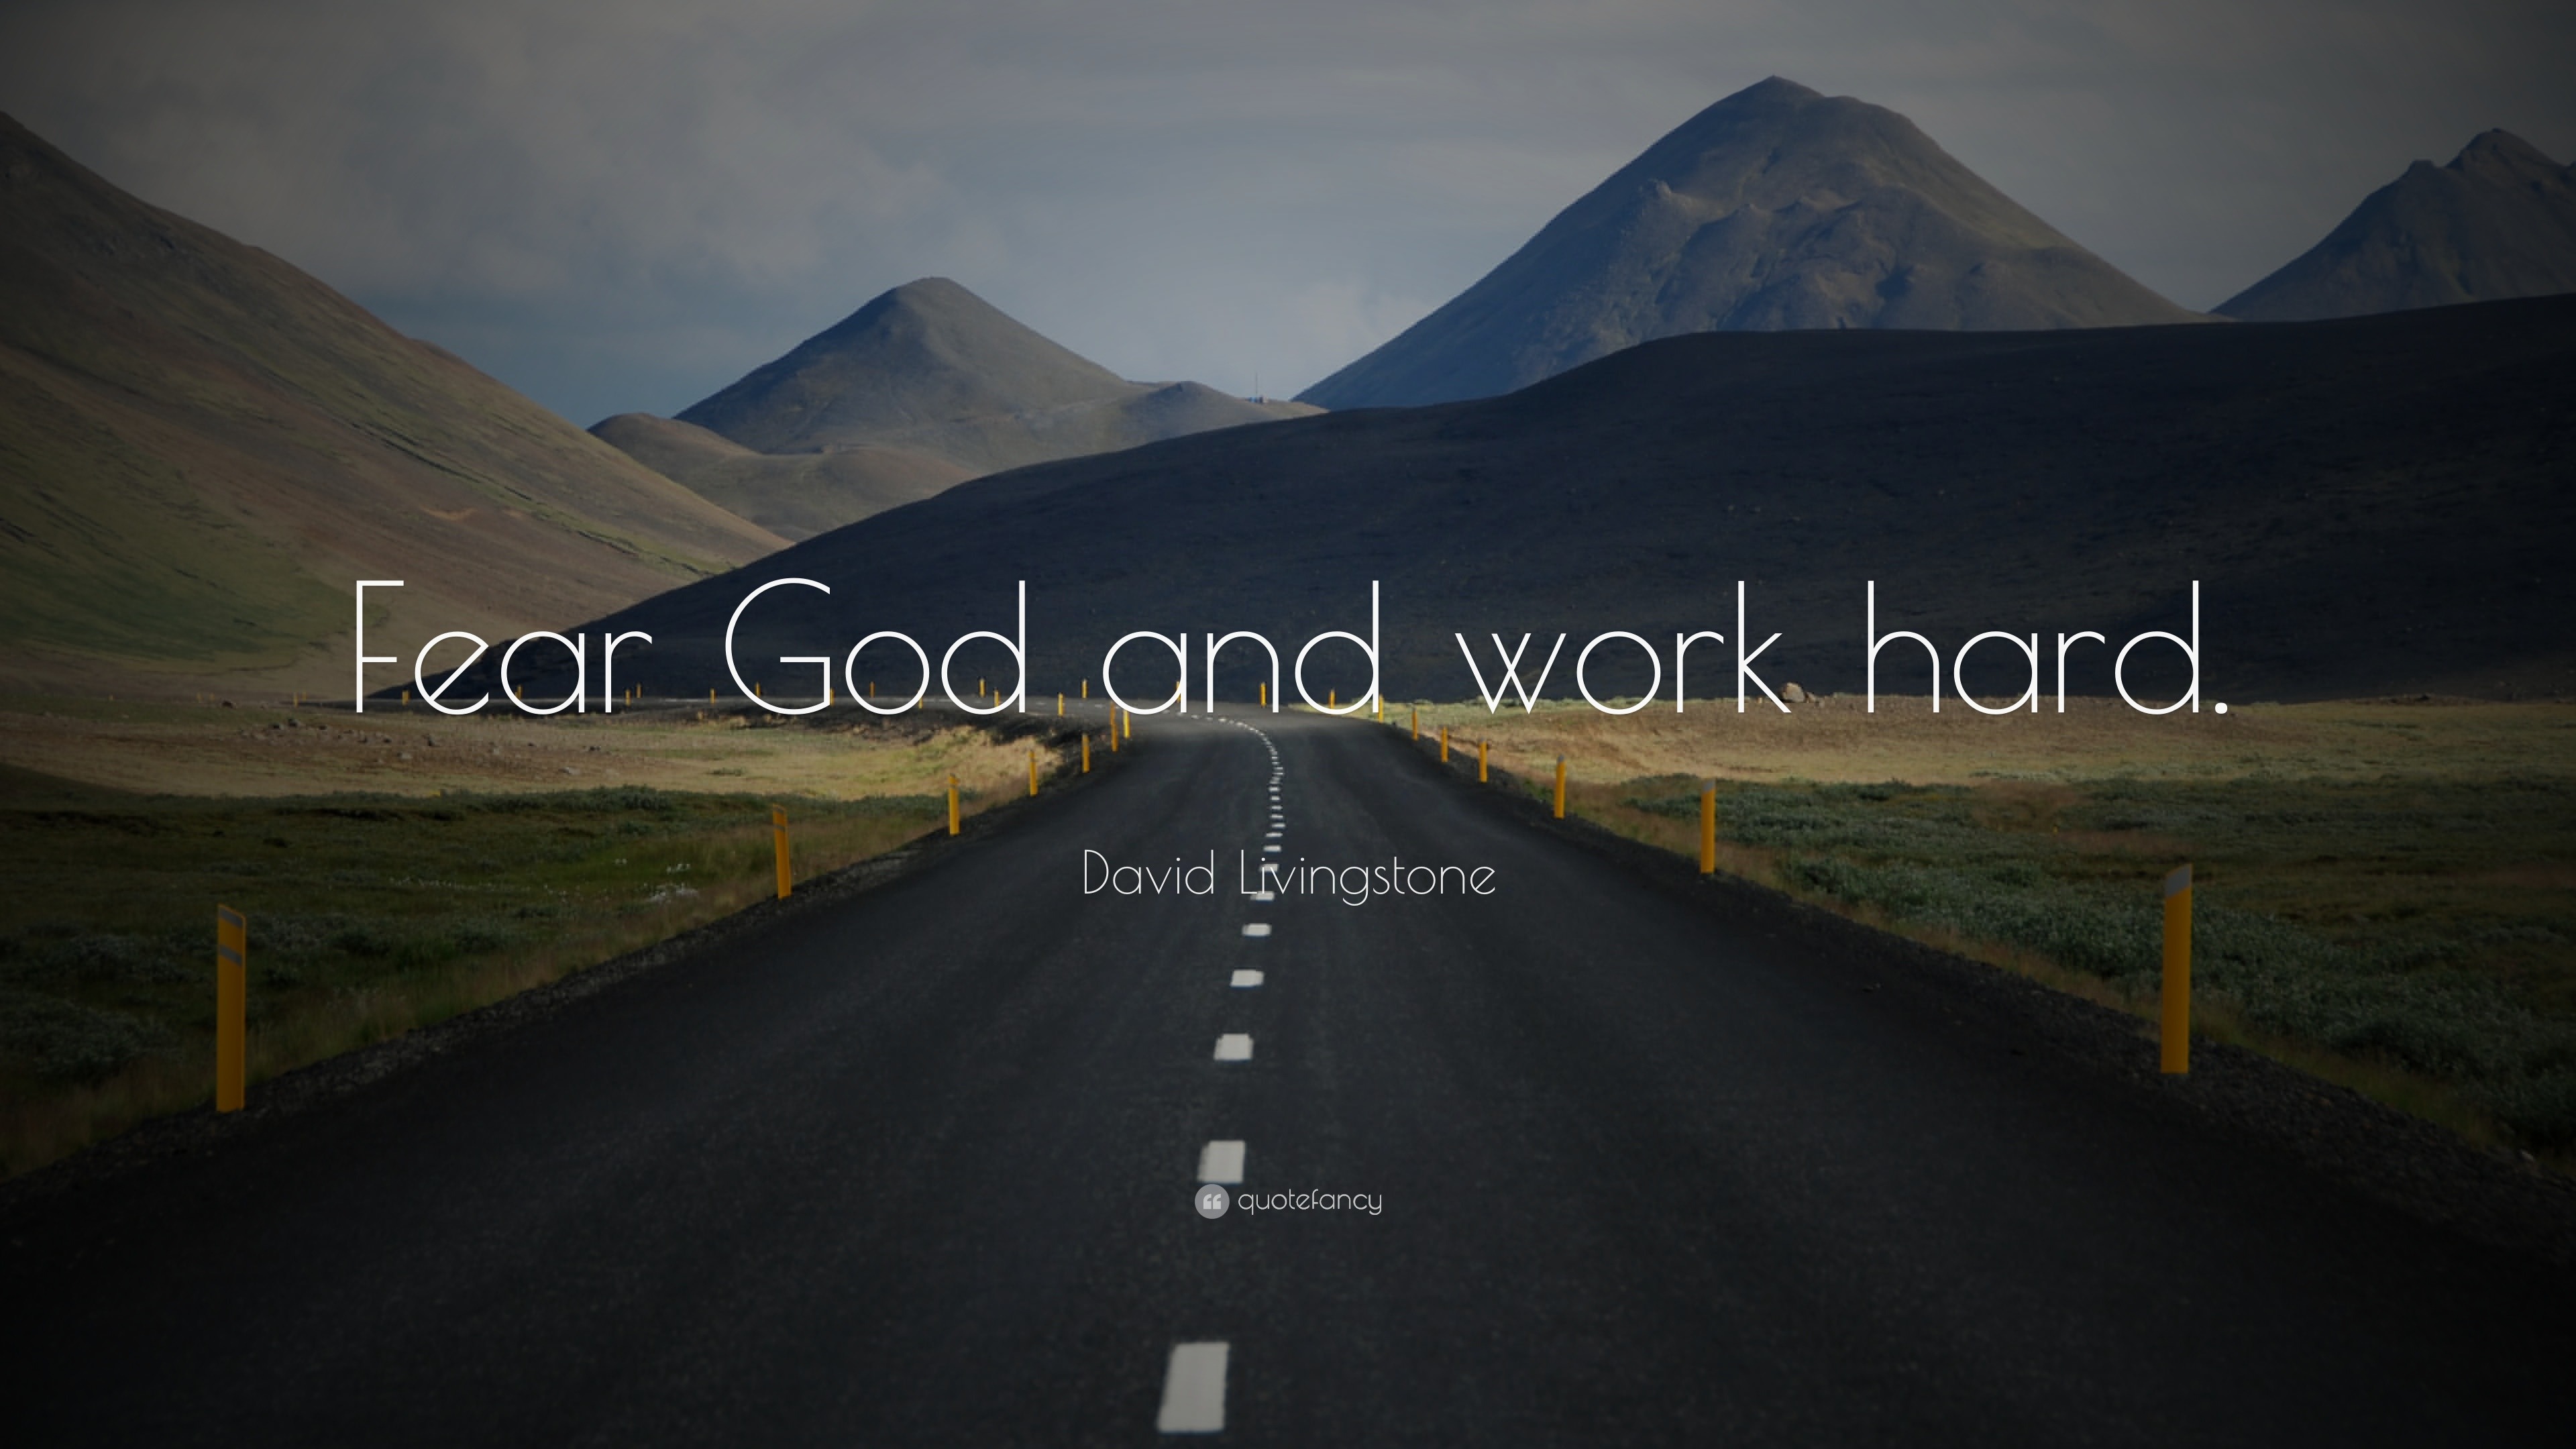 David Livingstone Quote: “Fear God and work hard.”